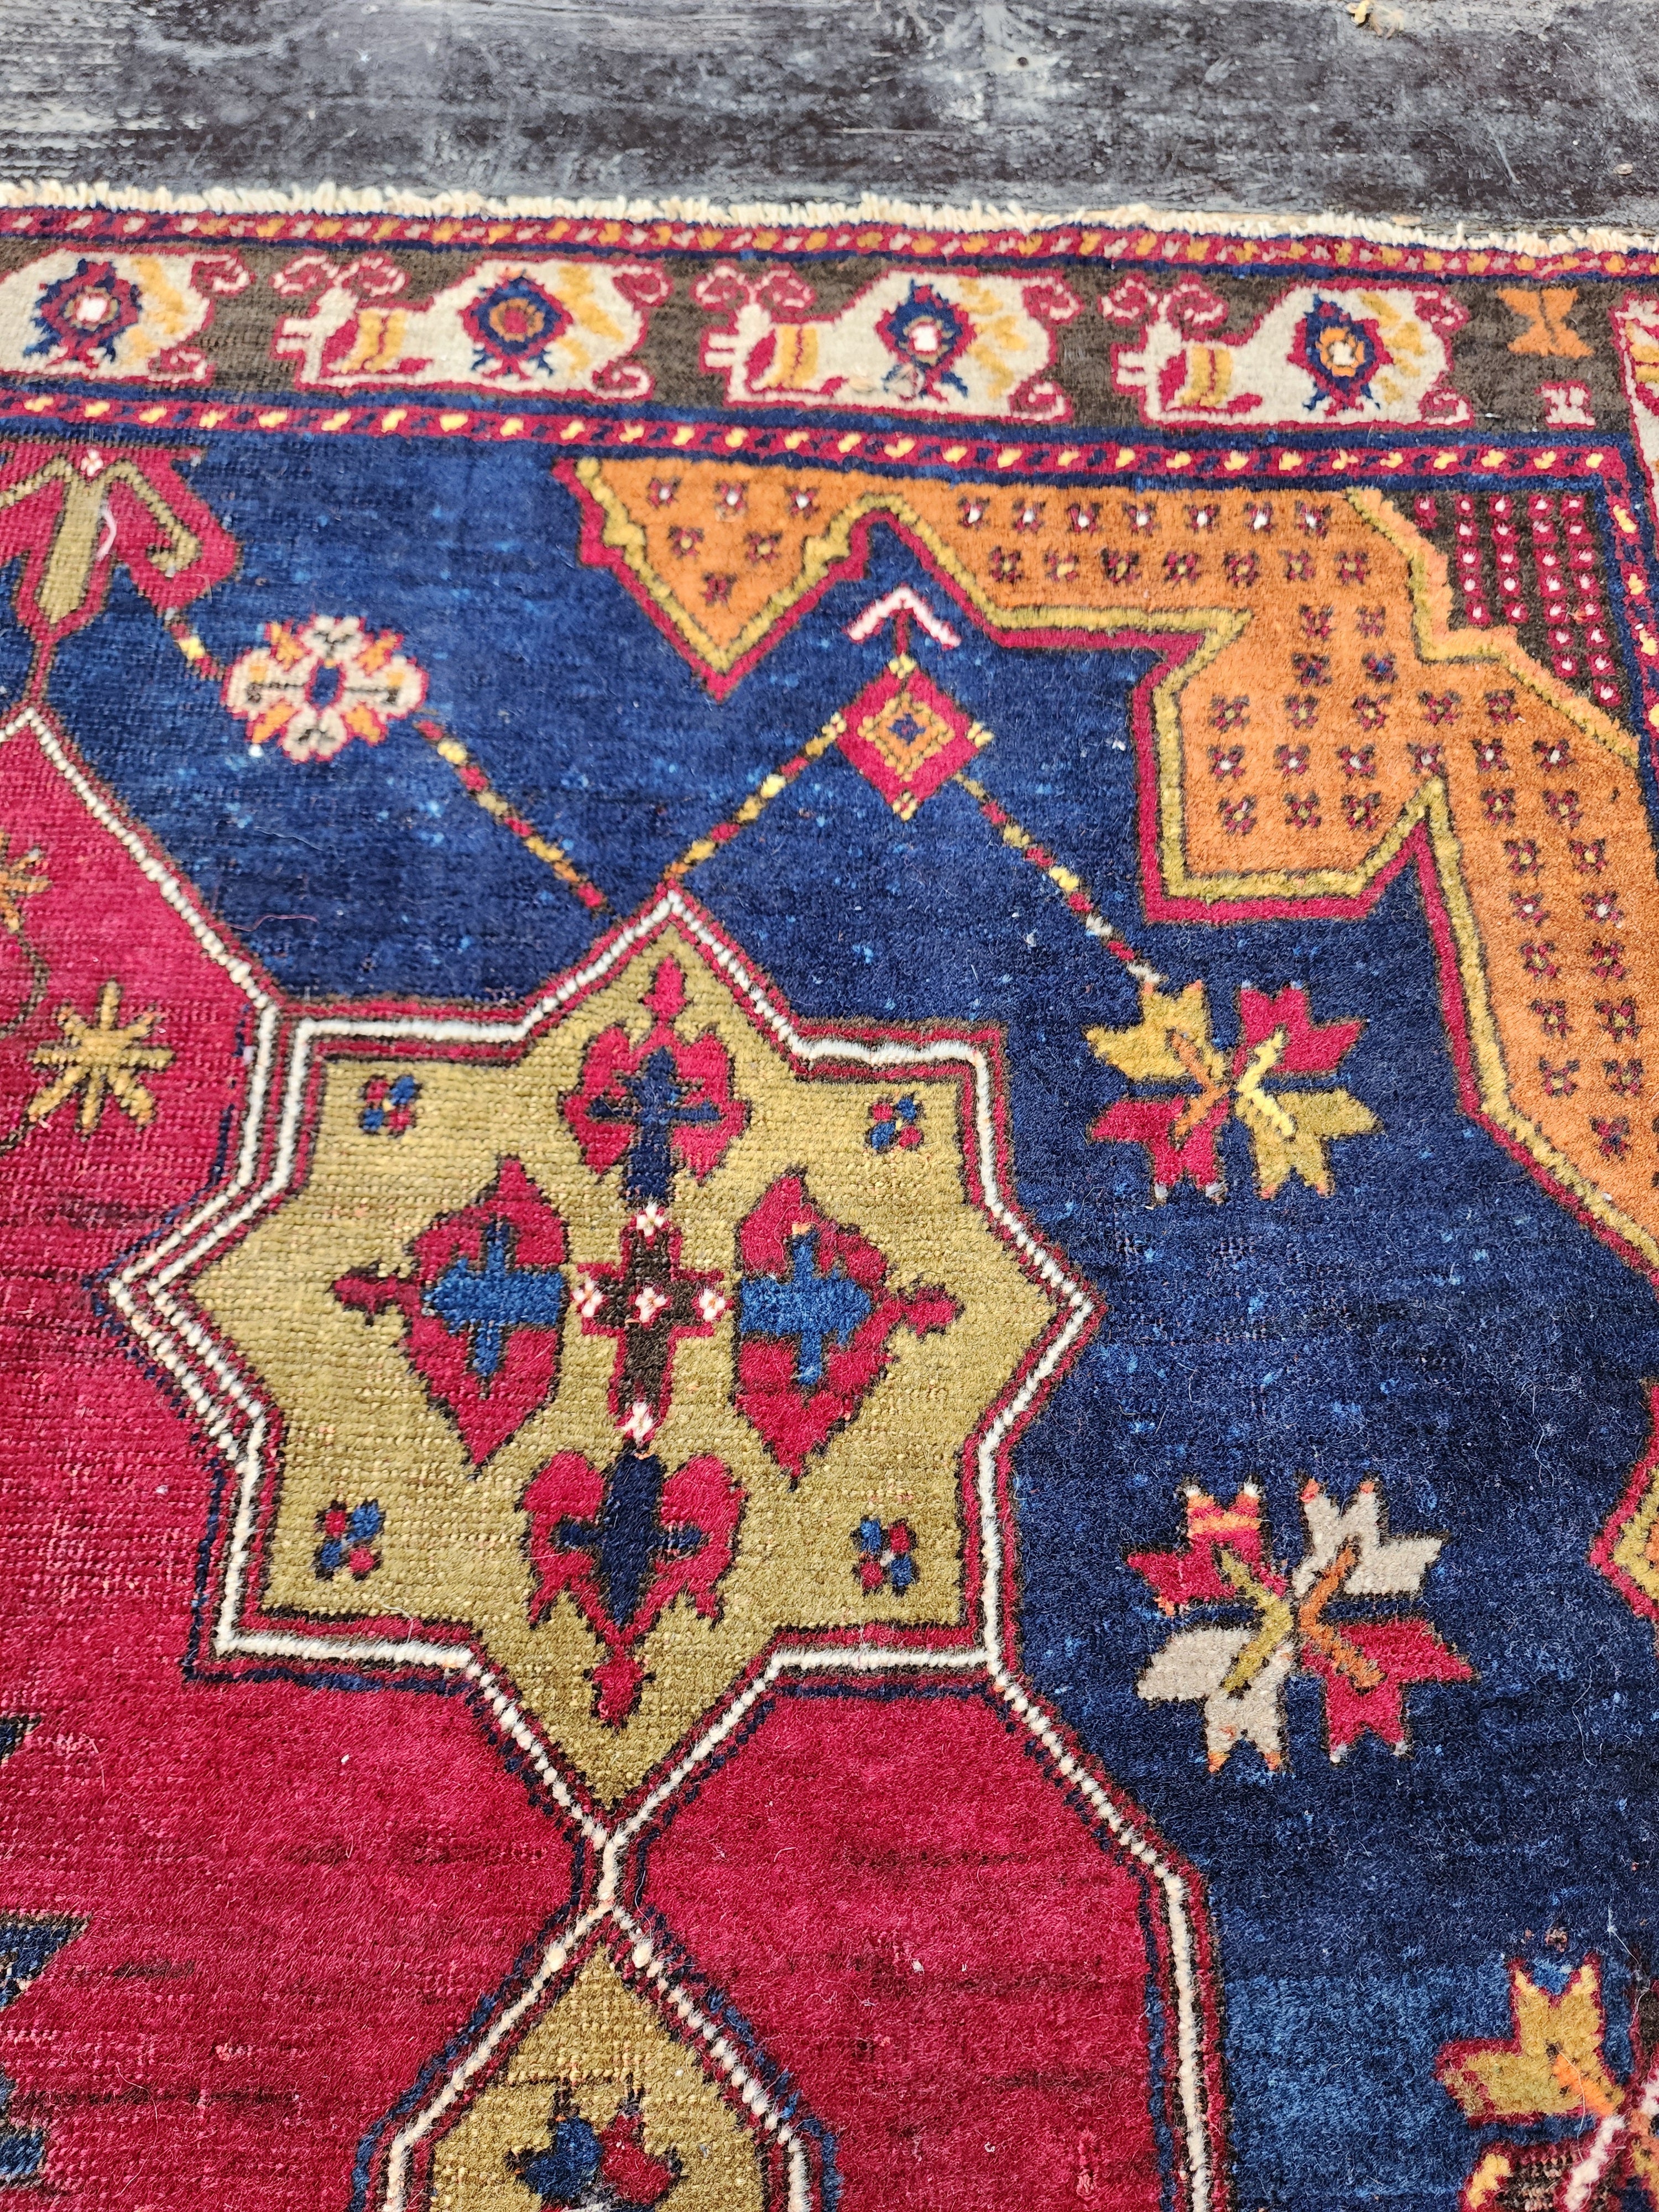 Red and Blue Antique Turkish Yahyalı Rug, 7'4''x4'3''